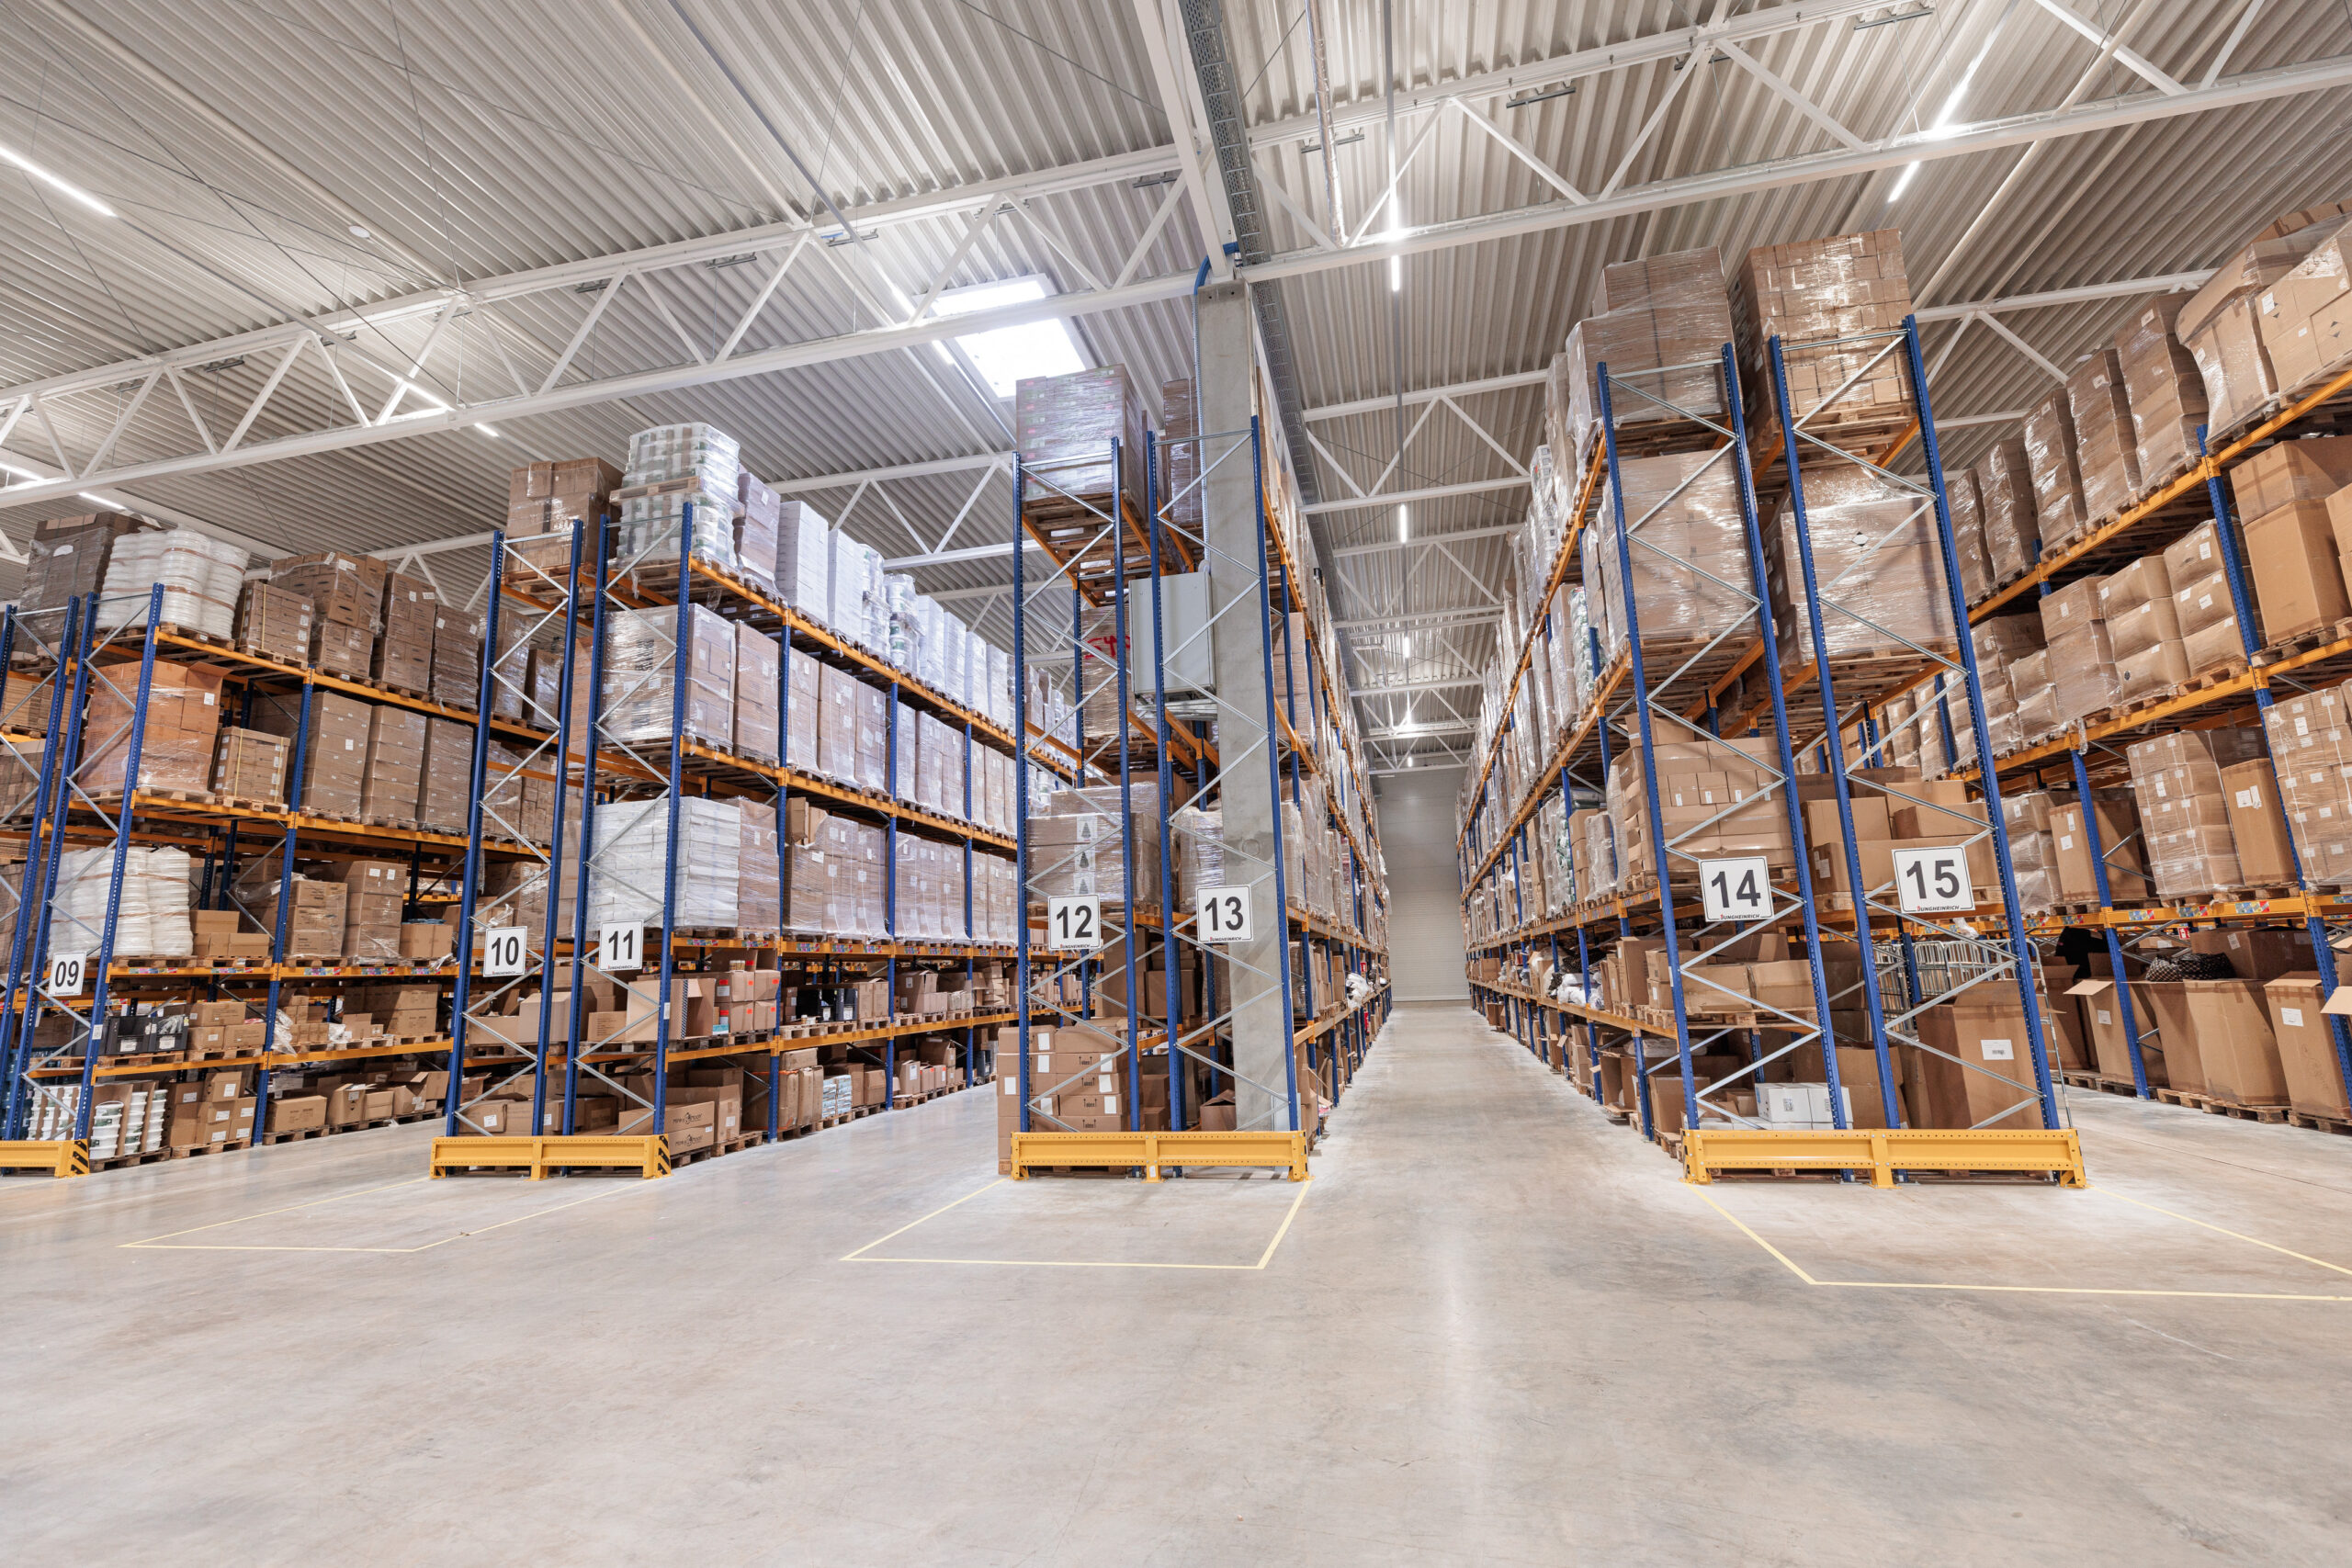 State-of-the-art shelving systems in a large warehouse